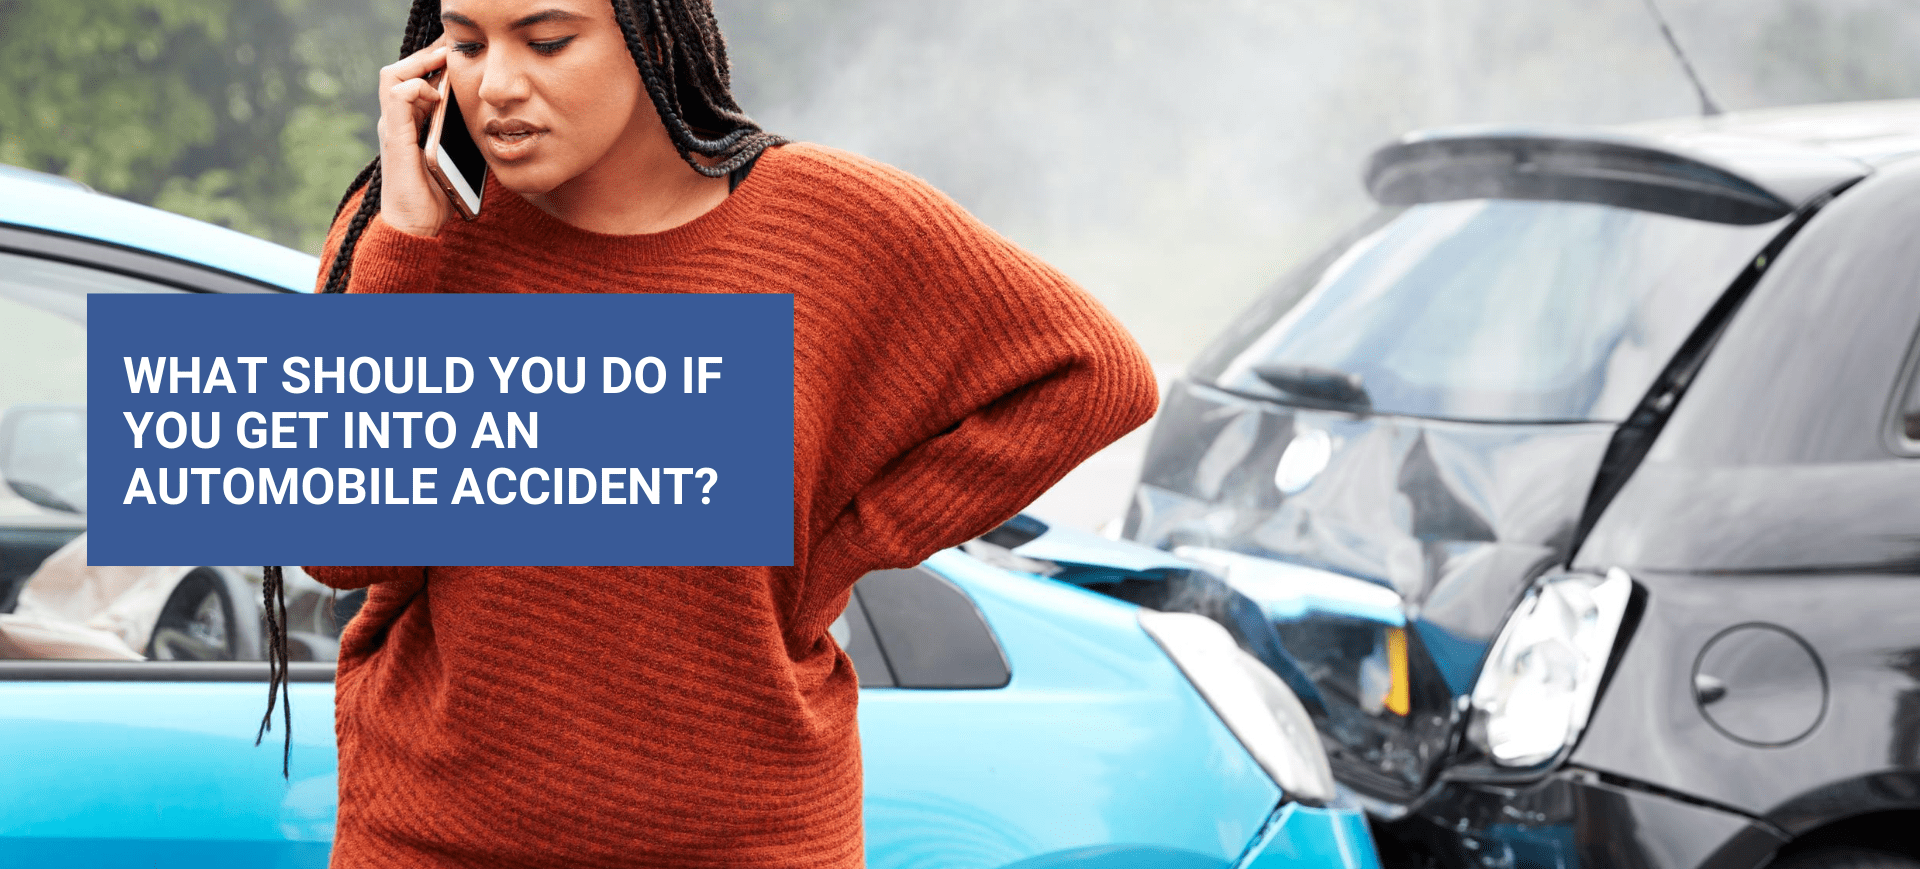 What Should You Do if You Get Into an Automobile Accident?